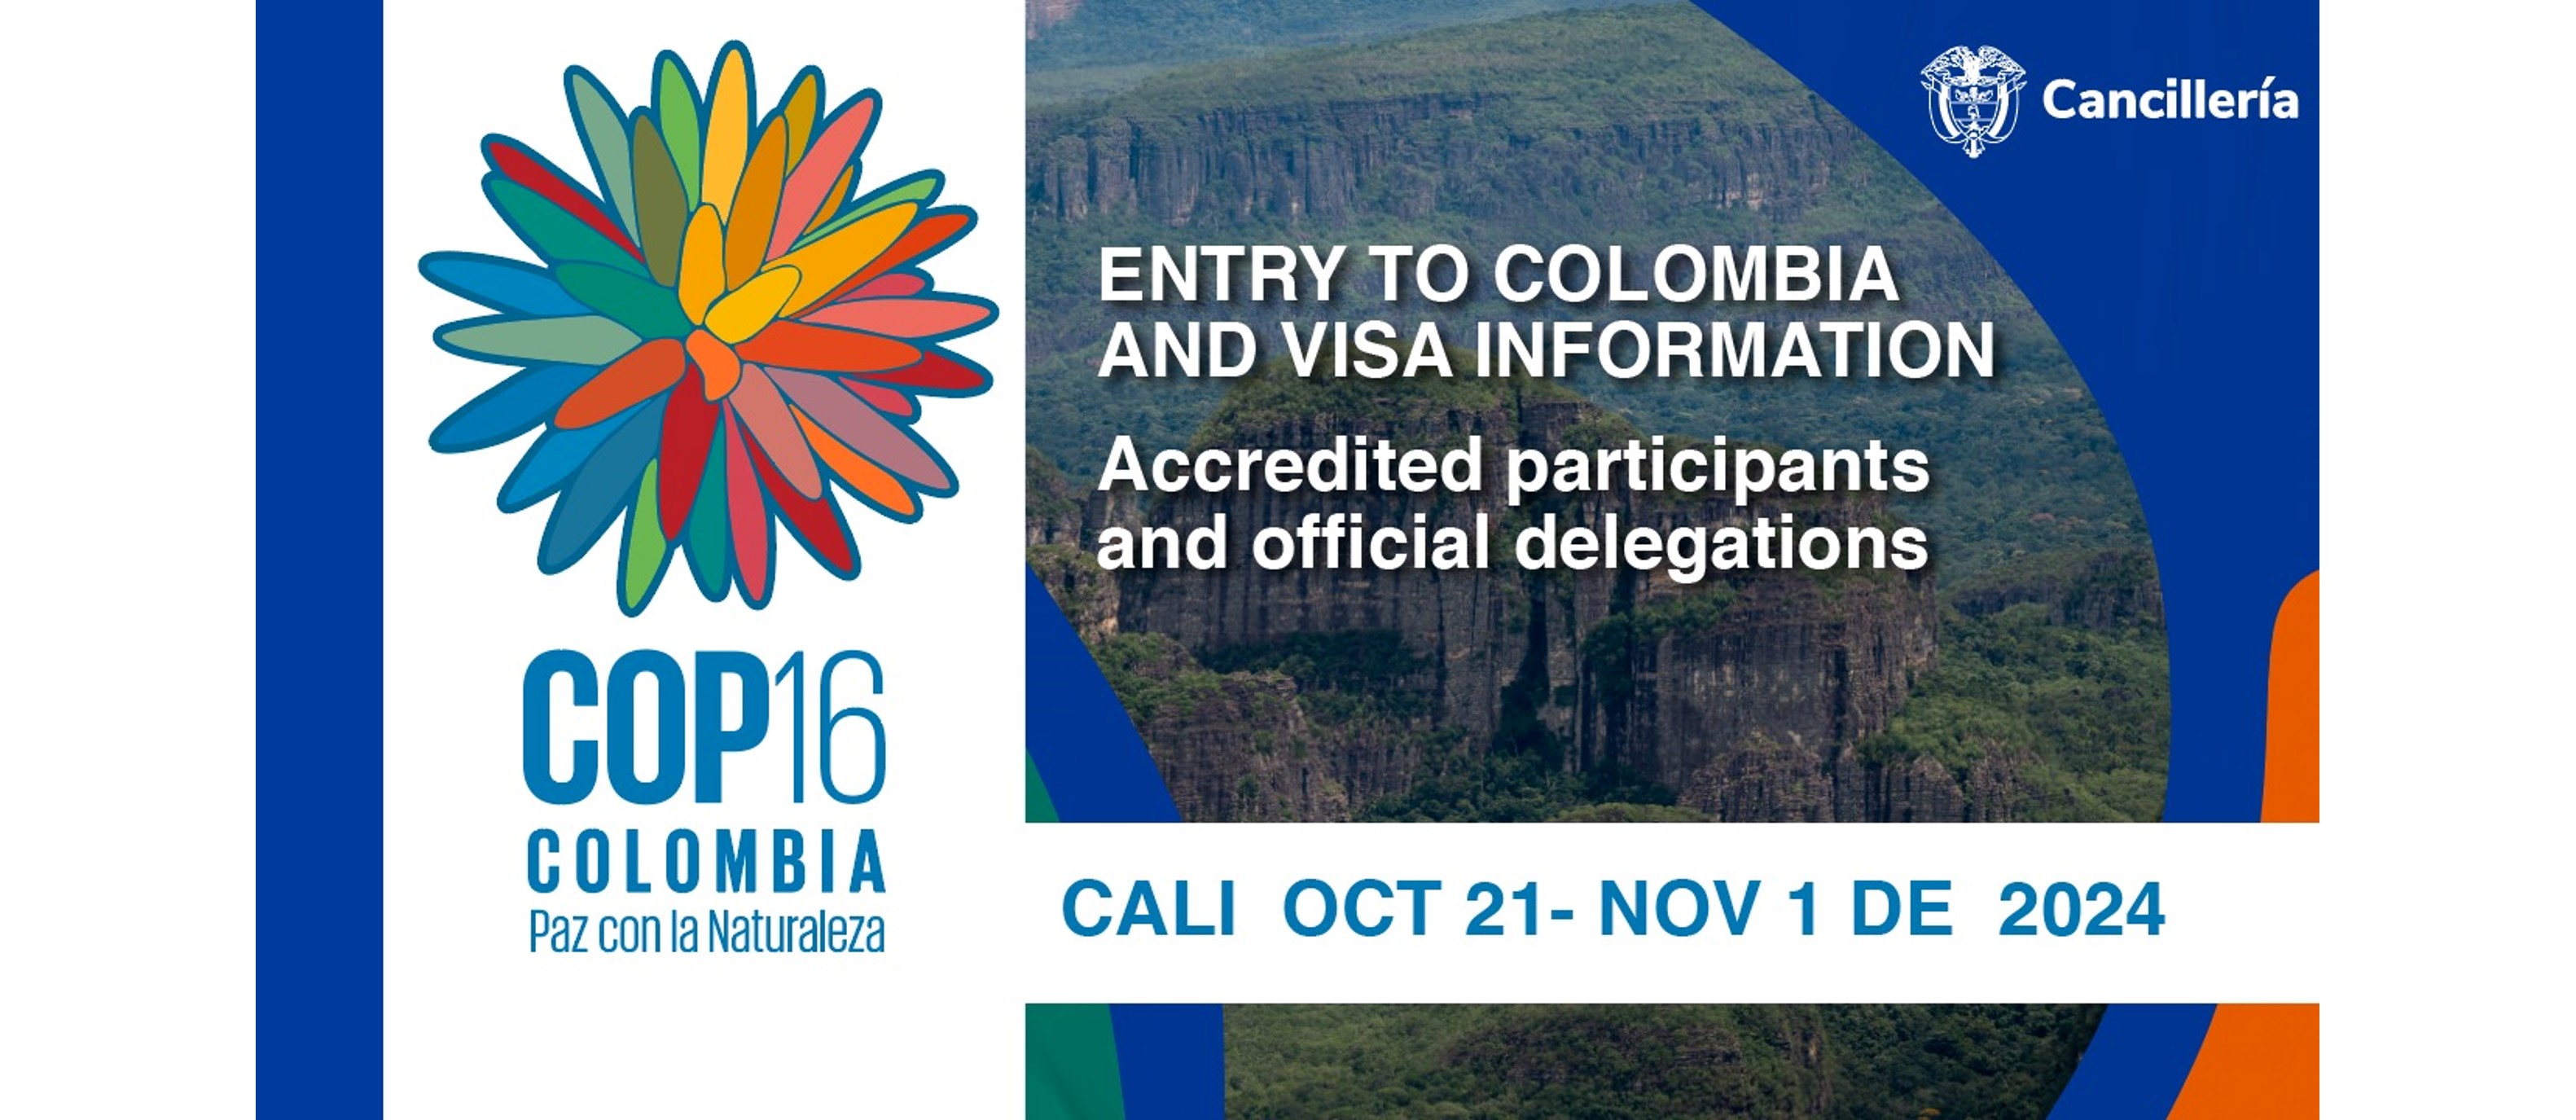 Entry to Colombia and visa information - Accredited participants and official delegations